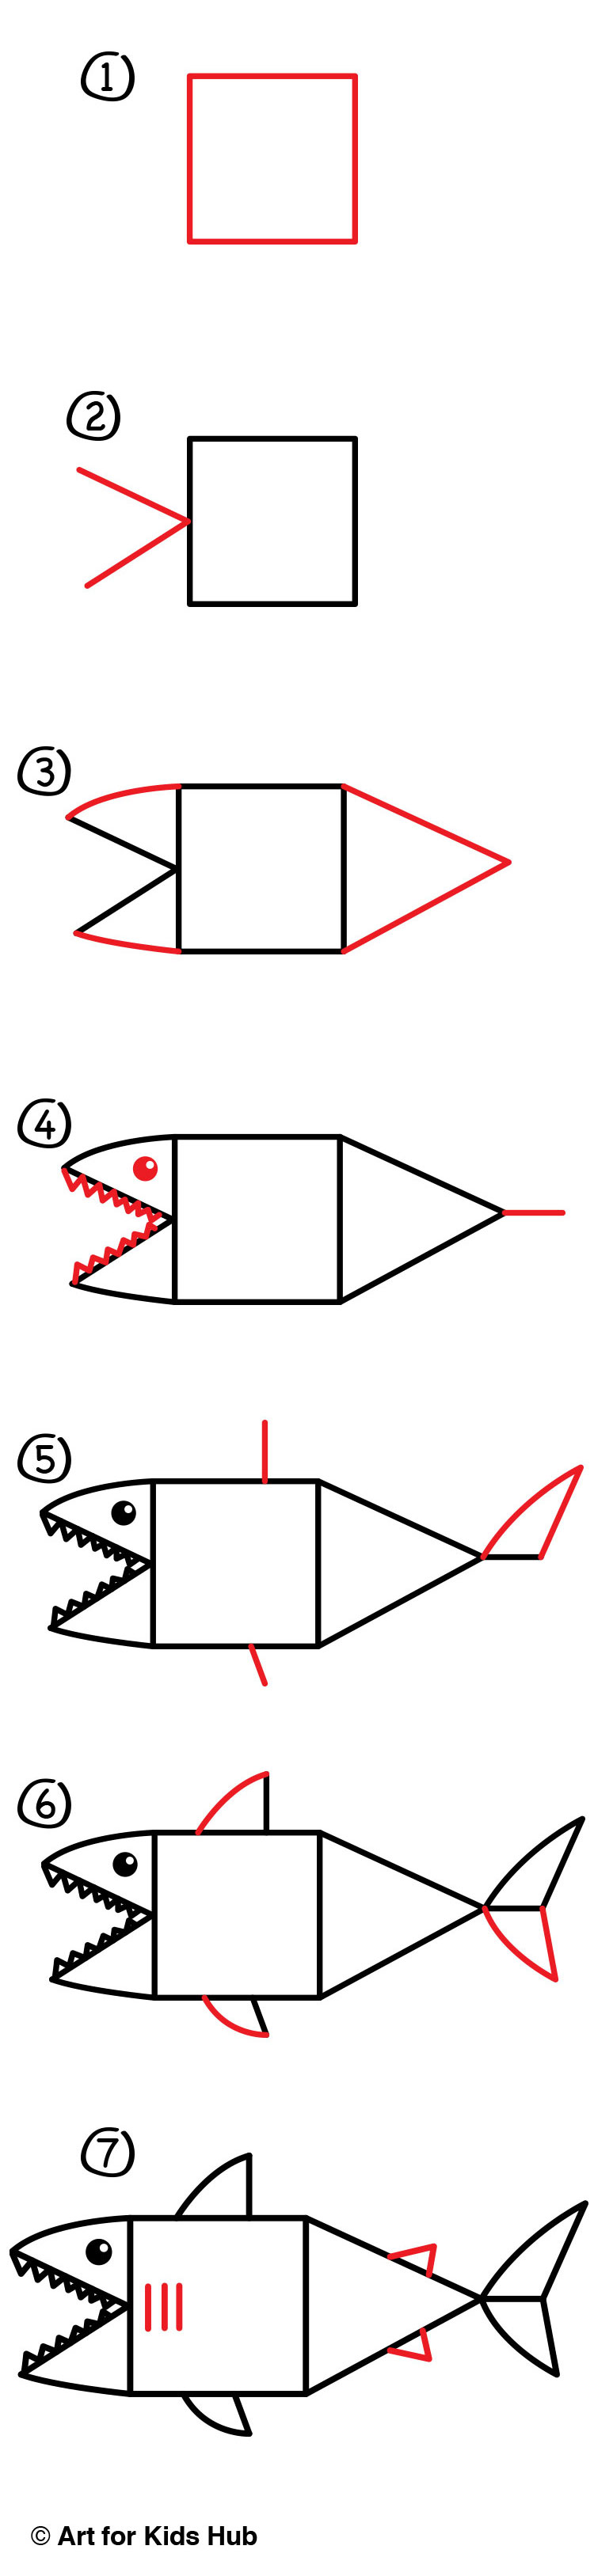 How To Draw A Shark With Shapes (young artists) - Art For